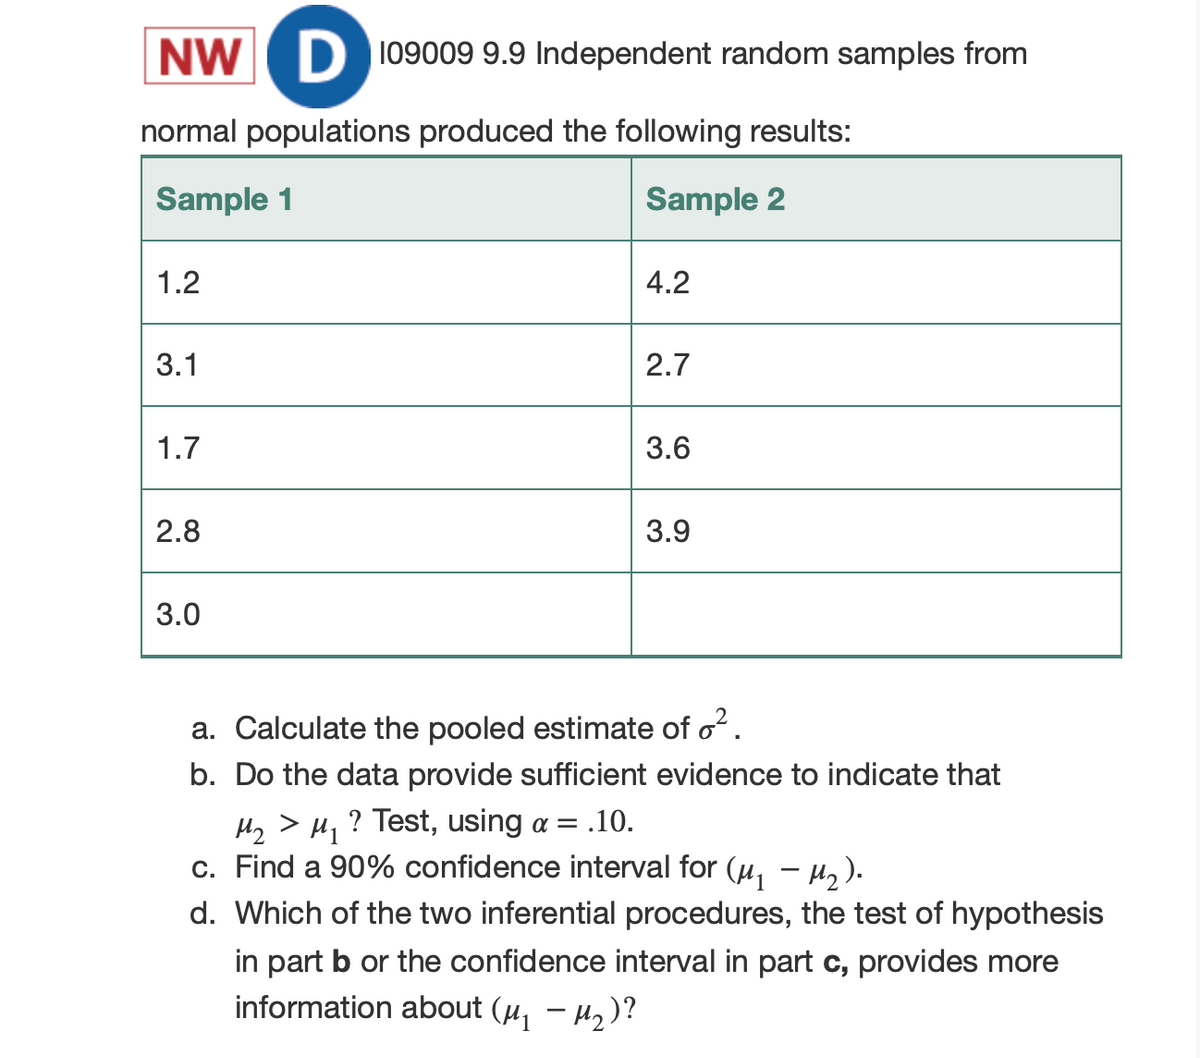 NW D 109009 9.9 Independent random samples from
normal populations produced the following results:
Sample 1
Sample 2
1.2
3.1
1.7
2.8
3.0
4.2
> M₁
2.7
3.6
3.9
a. Calculate the pooled estimate of o².
b. Do the data provide sufficient evidence to indicate that
: .10.
? Test, using a =
M₂
c. Find a 90% confidence interval for (µ₁ − µ₂).
d. Which of the two inferential procedures, the test of hypothesis
in part b or the confidence interval in part c, provides more
information about (μ₁ −µ₂)?